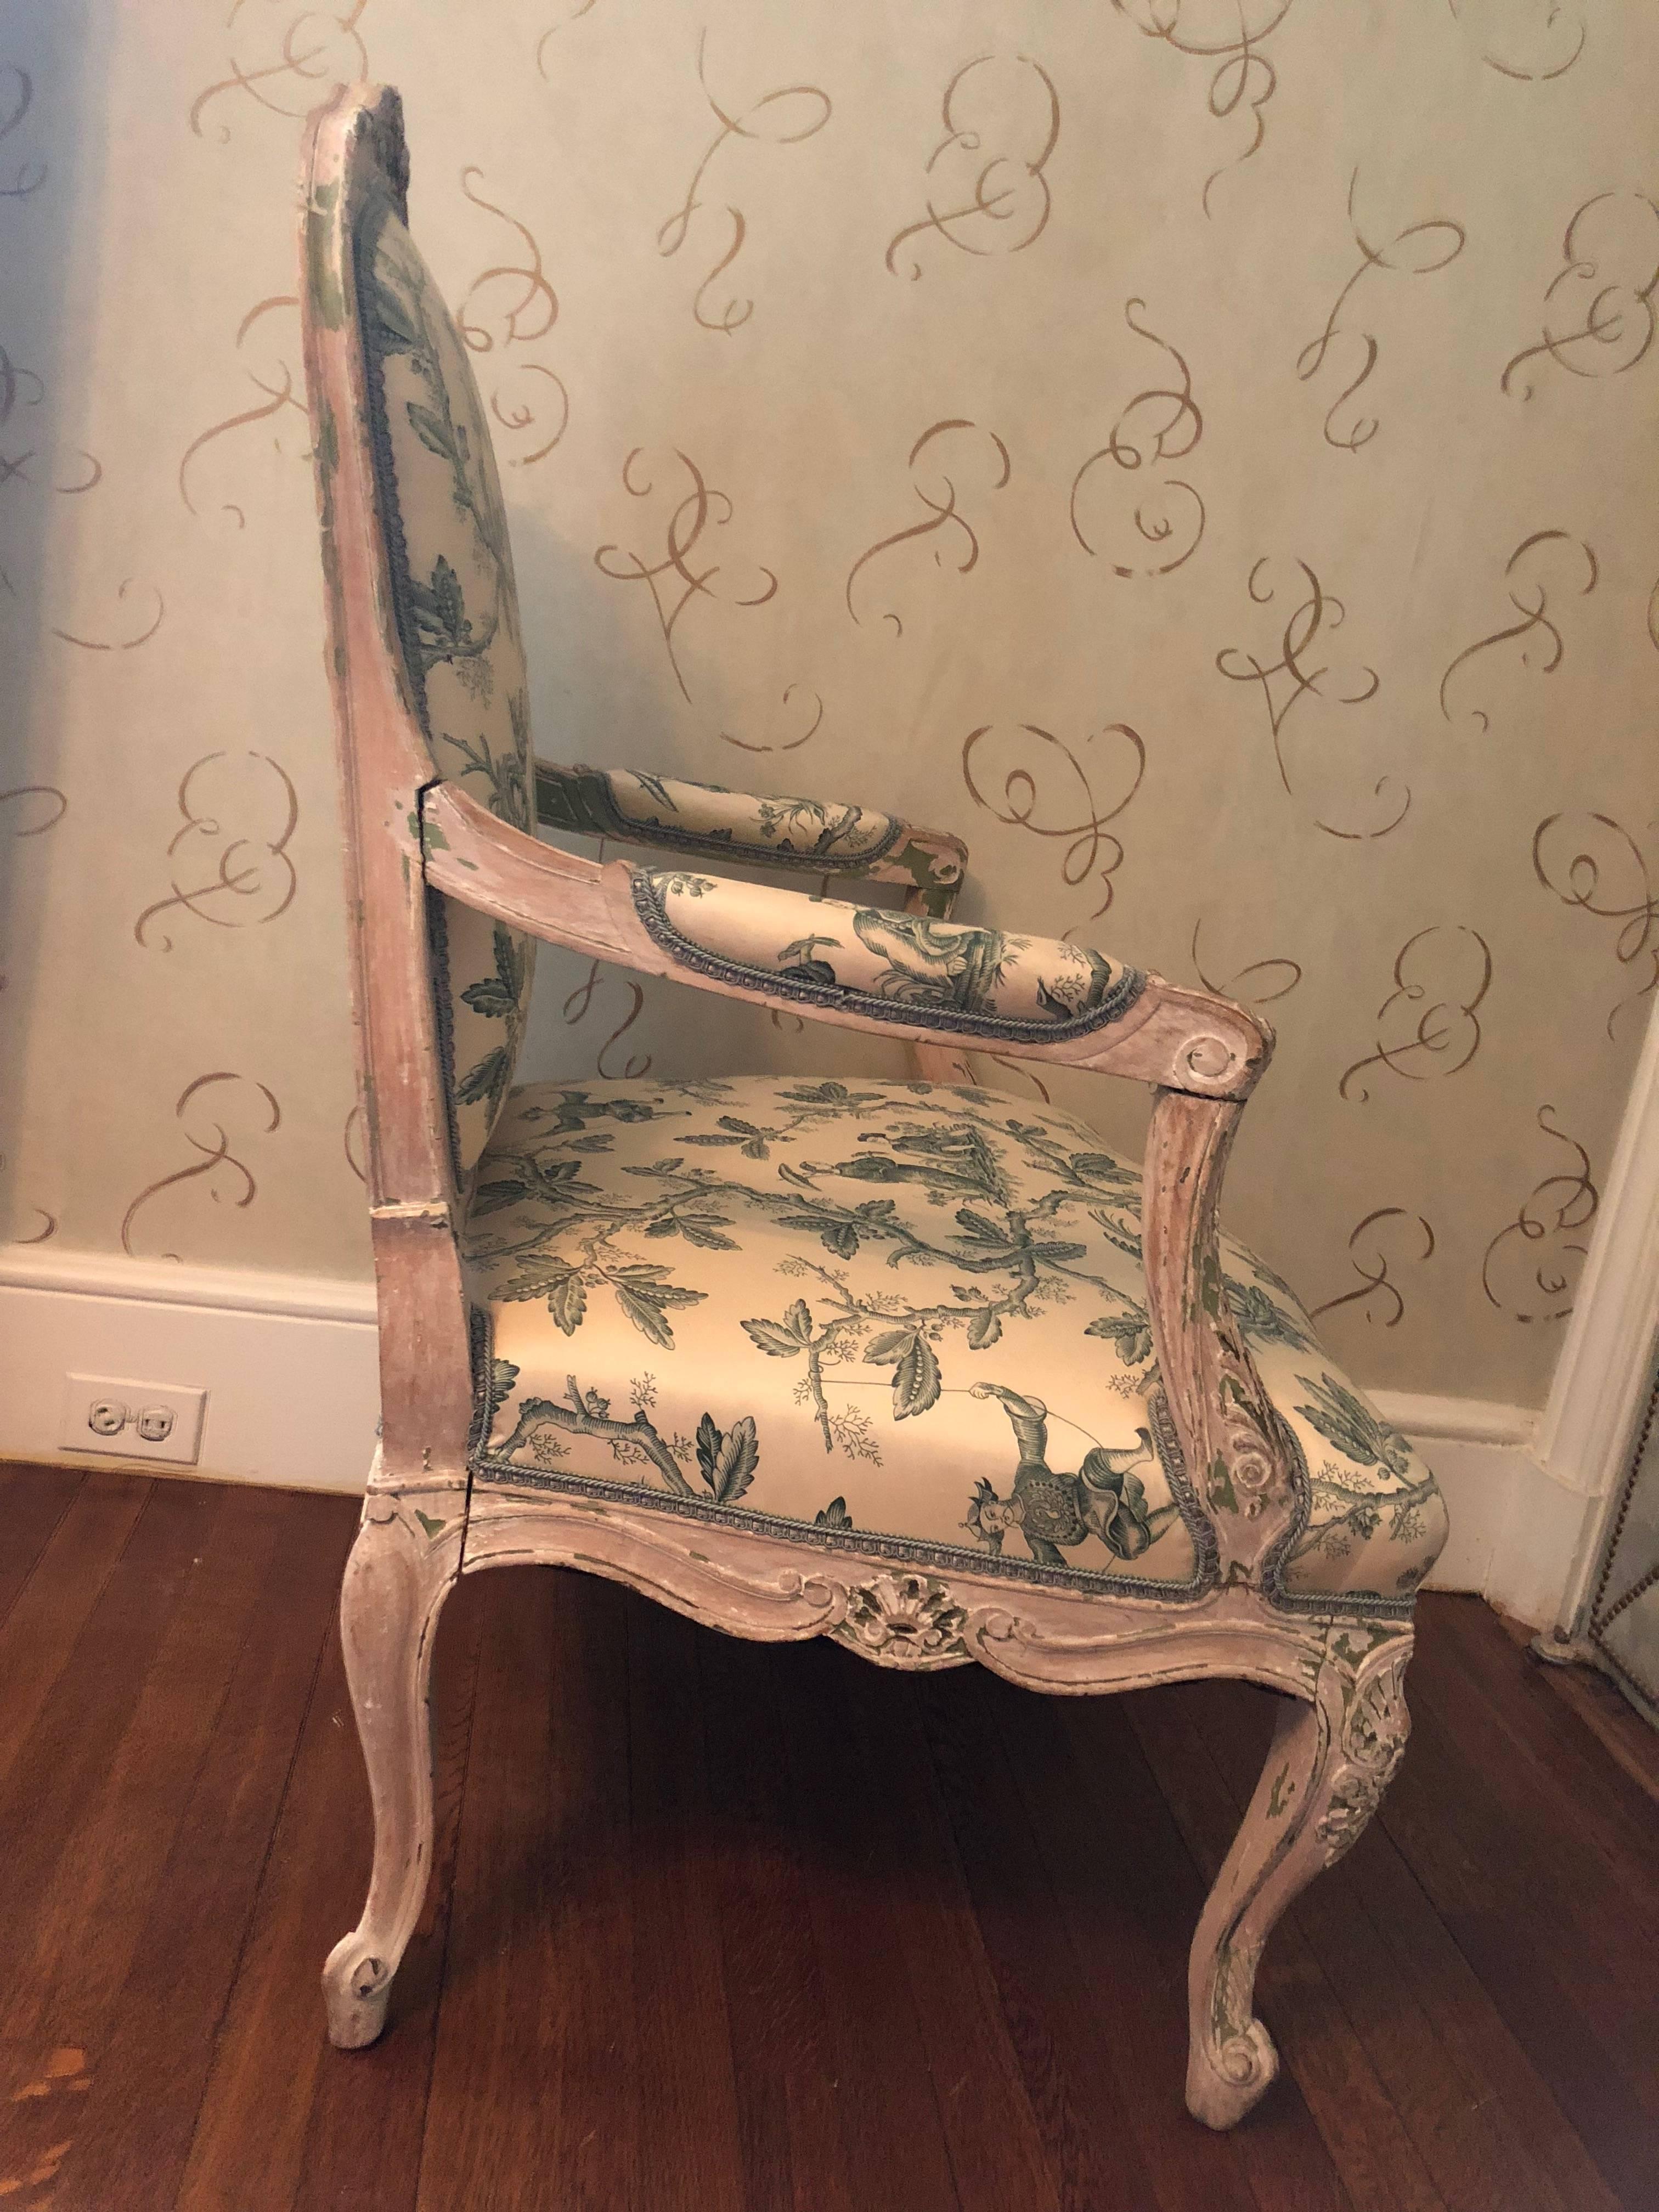 Gorgeous Louis XVI style chair upholstered in a designer chinoiserie motif silk fabric. The chair has remnants of a blue/green paint appearing on the wood, contributing to its overall character. Measure: Arm height is 27, apron to floor is 11.5.